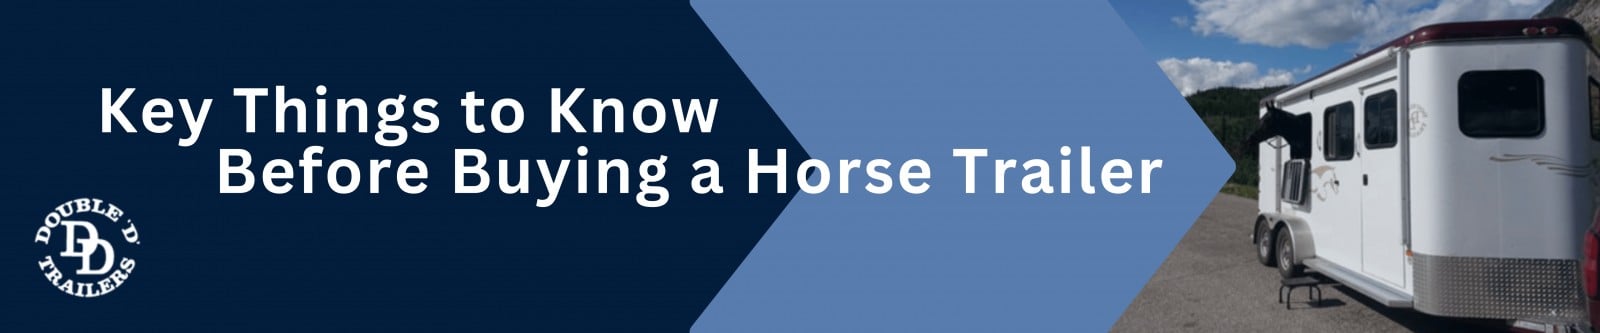 Key Things to Know Before Buying a Horse Trailer